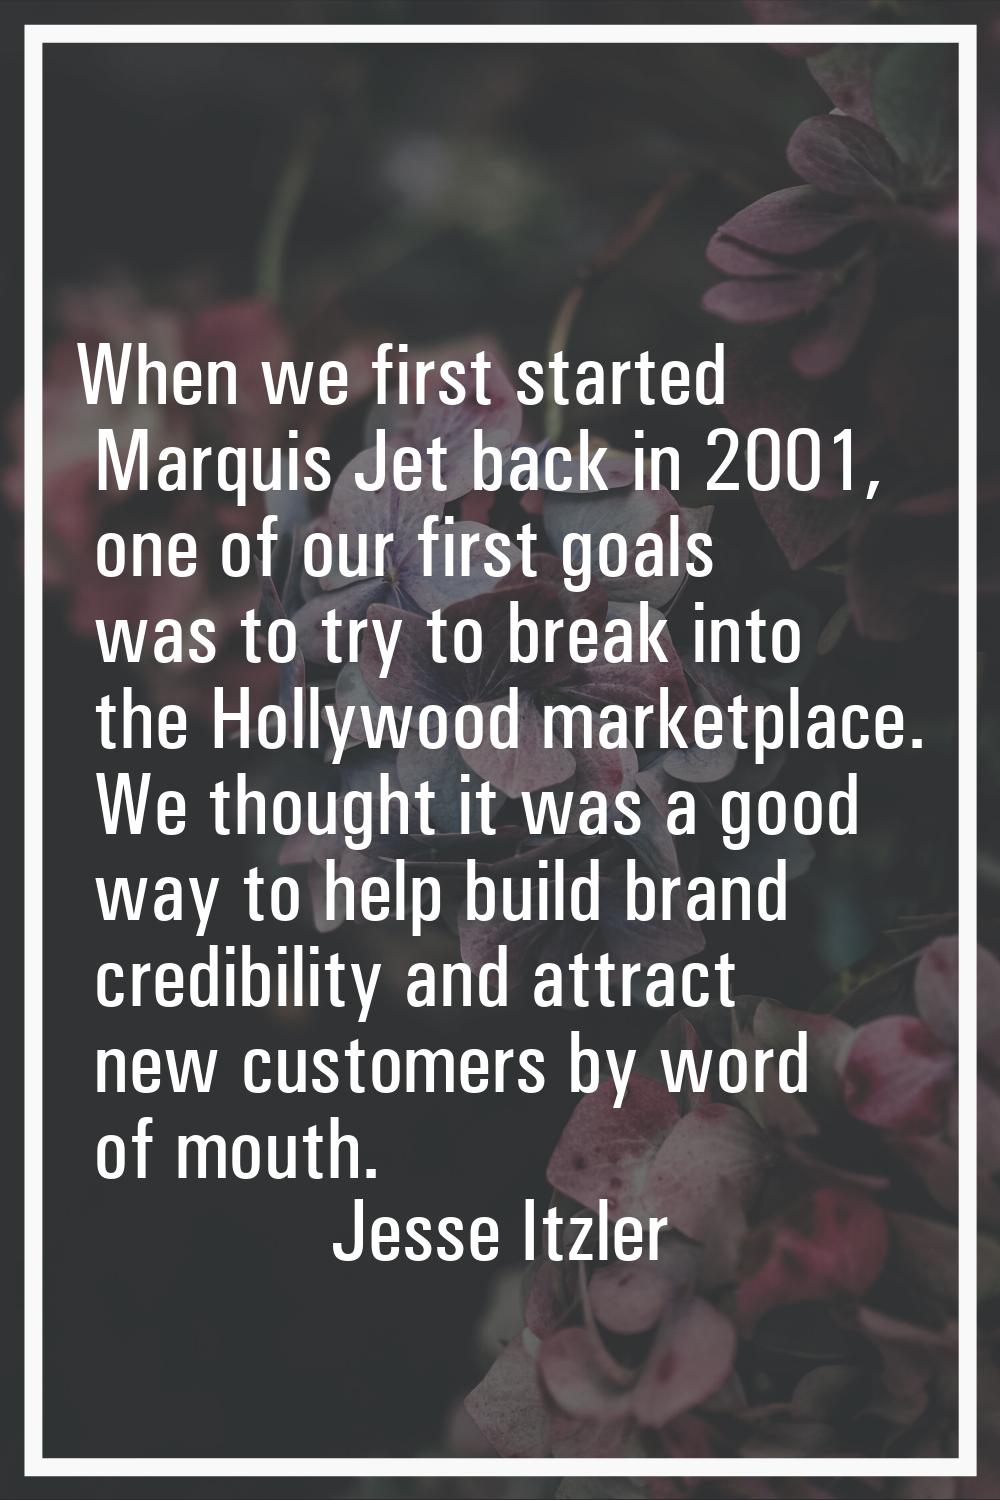 When we first started Marquis Jet back in 2001, one of our first goals was to try to break into the